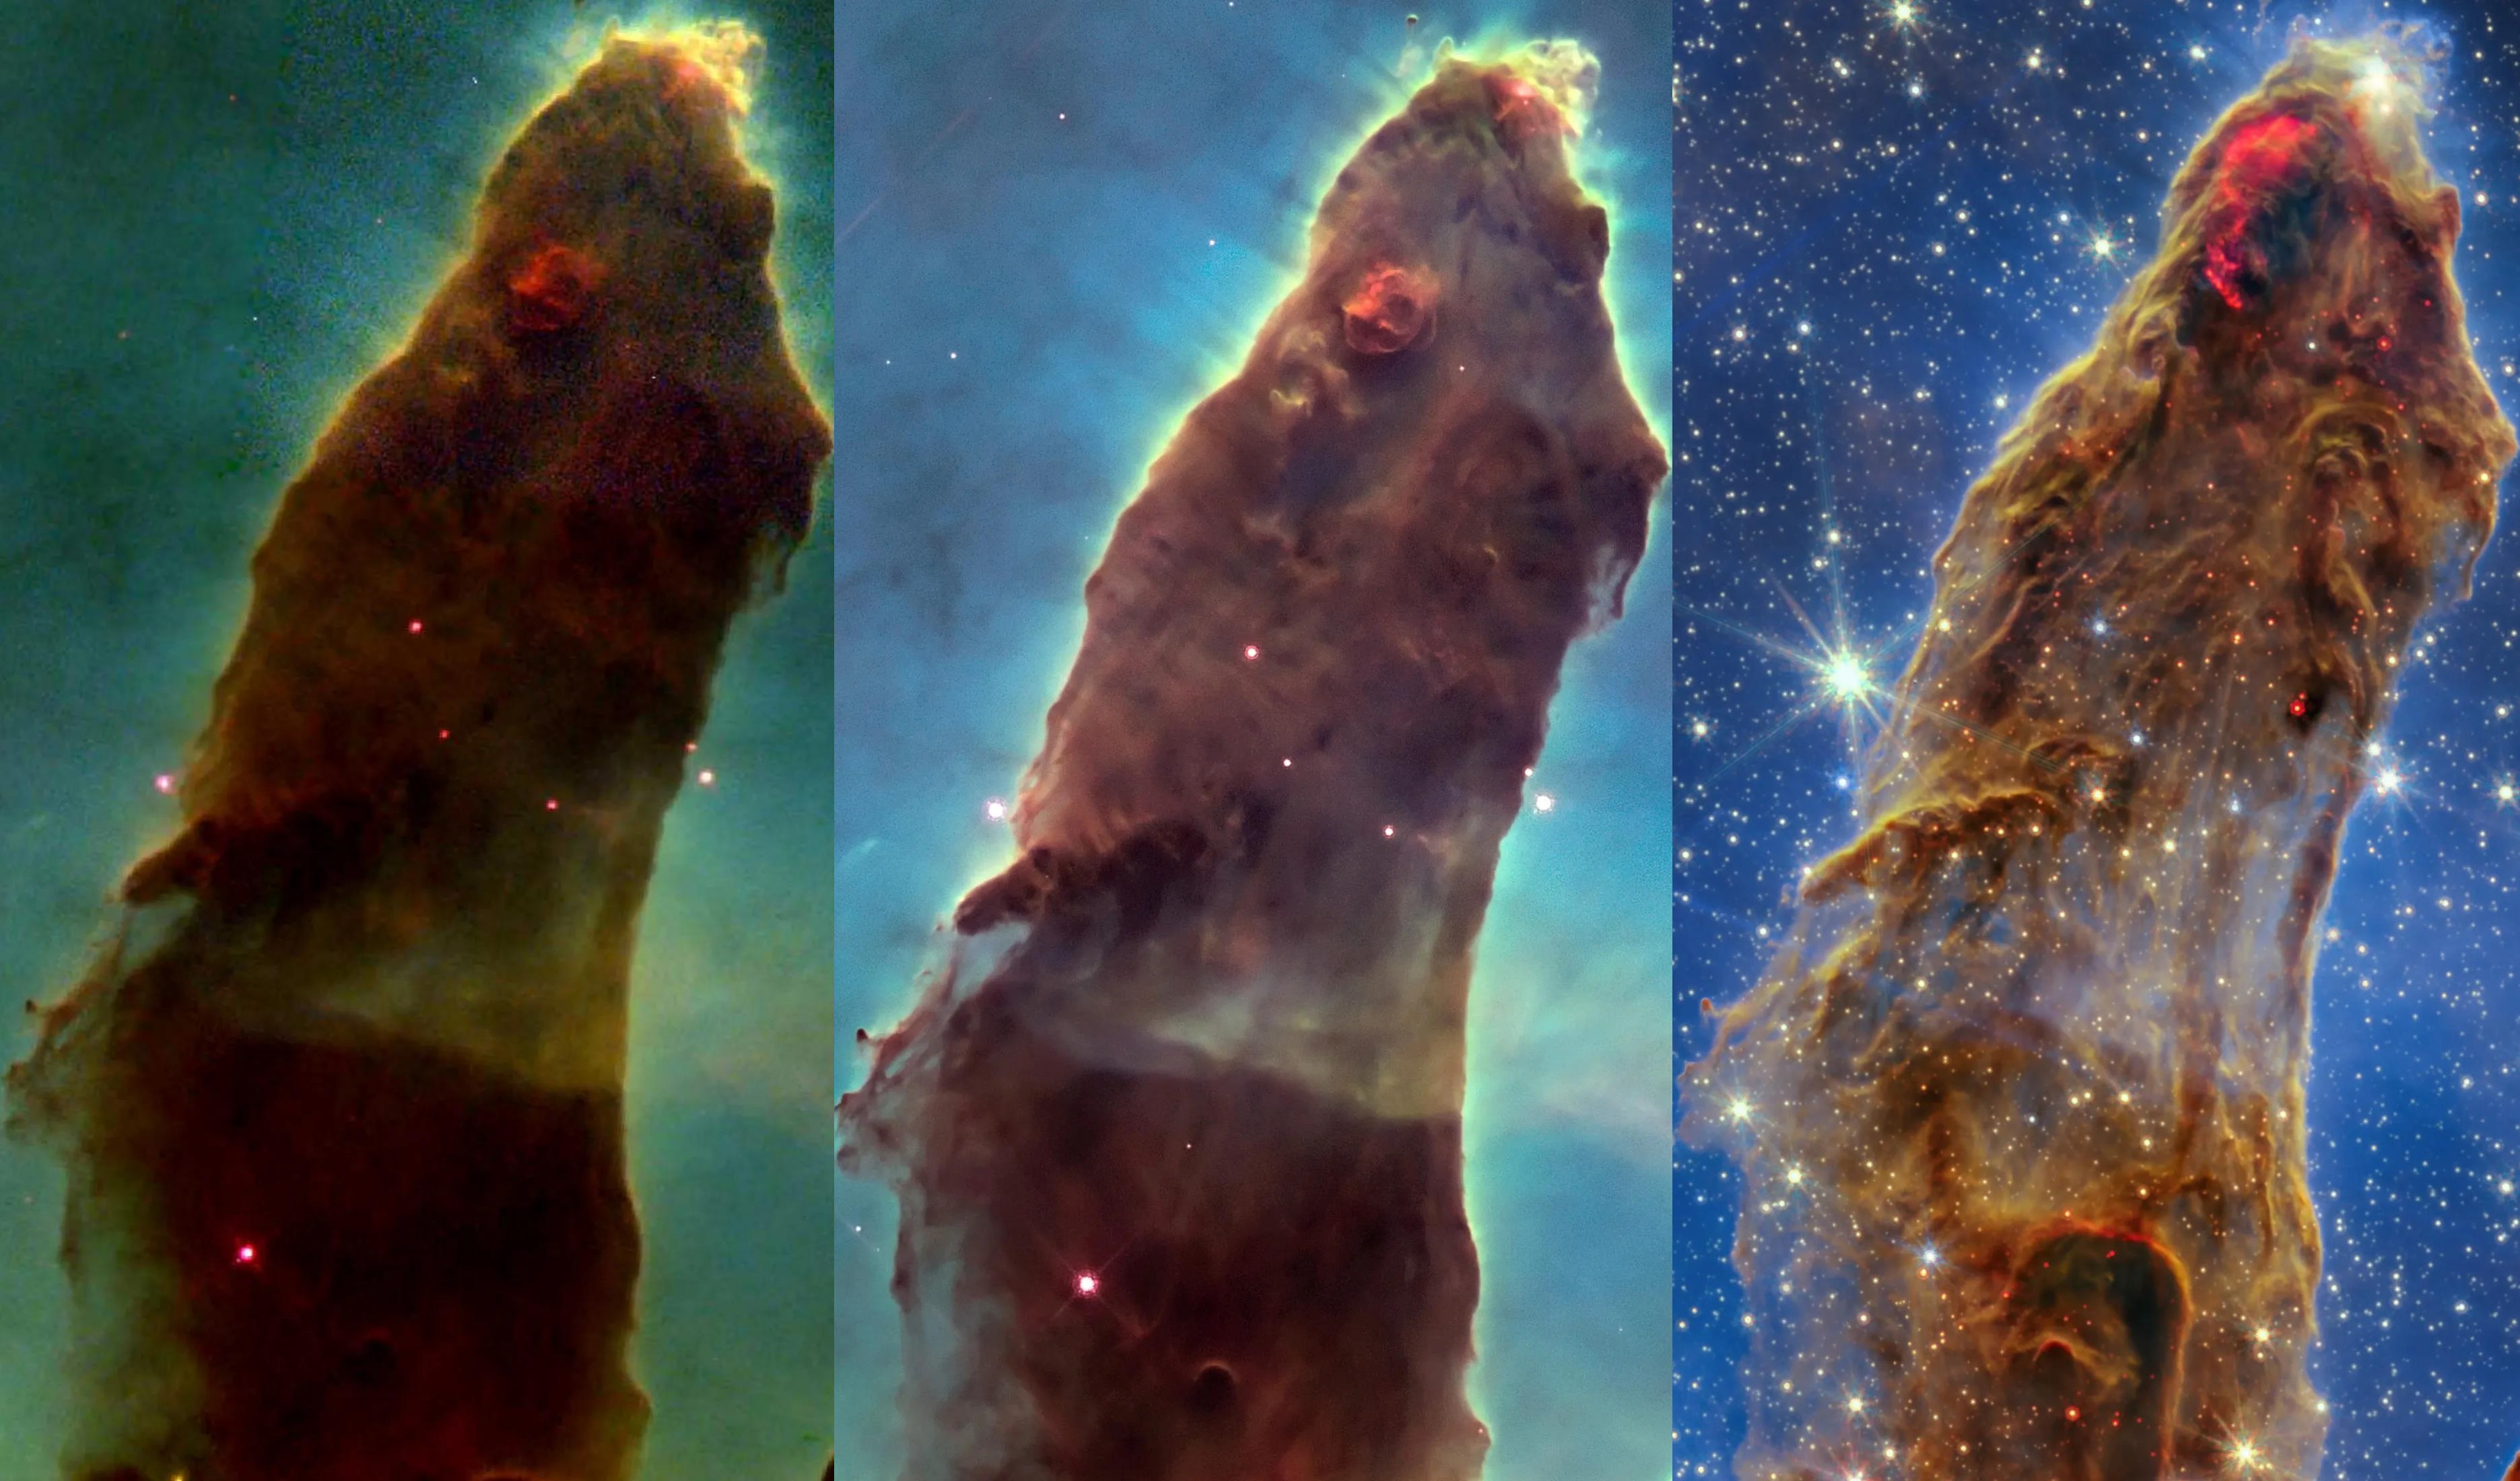 Three images of the same celestial pillar from the Eagle Nebula, known as the Pillars of Creation, captured by Hubble (left, center) and James Webb (right) telescopes, show progressive detail and color variation from green to blue to starfield.